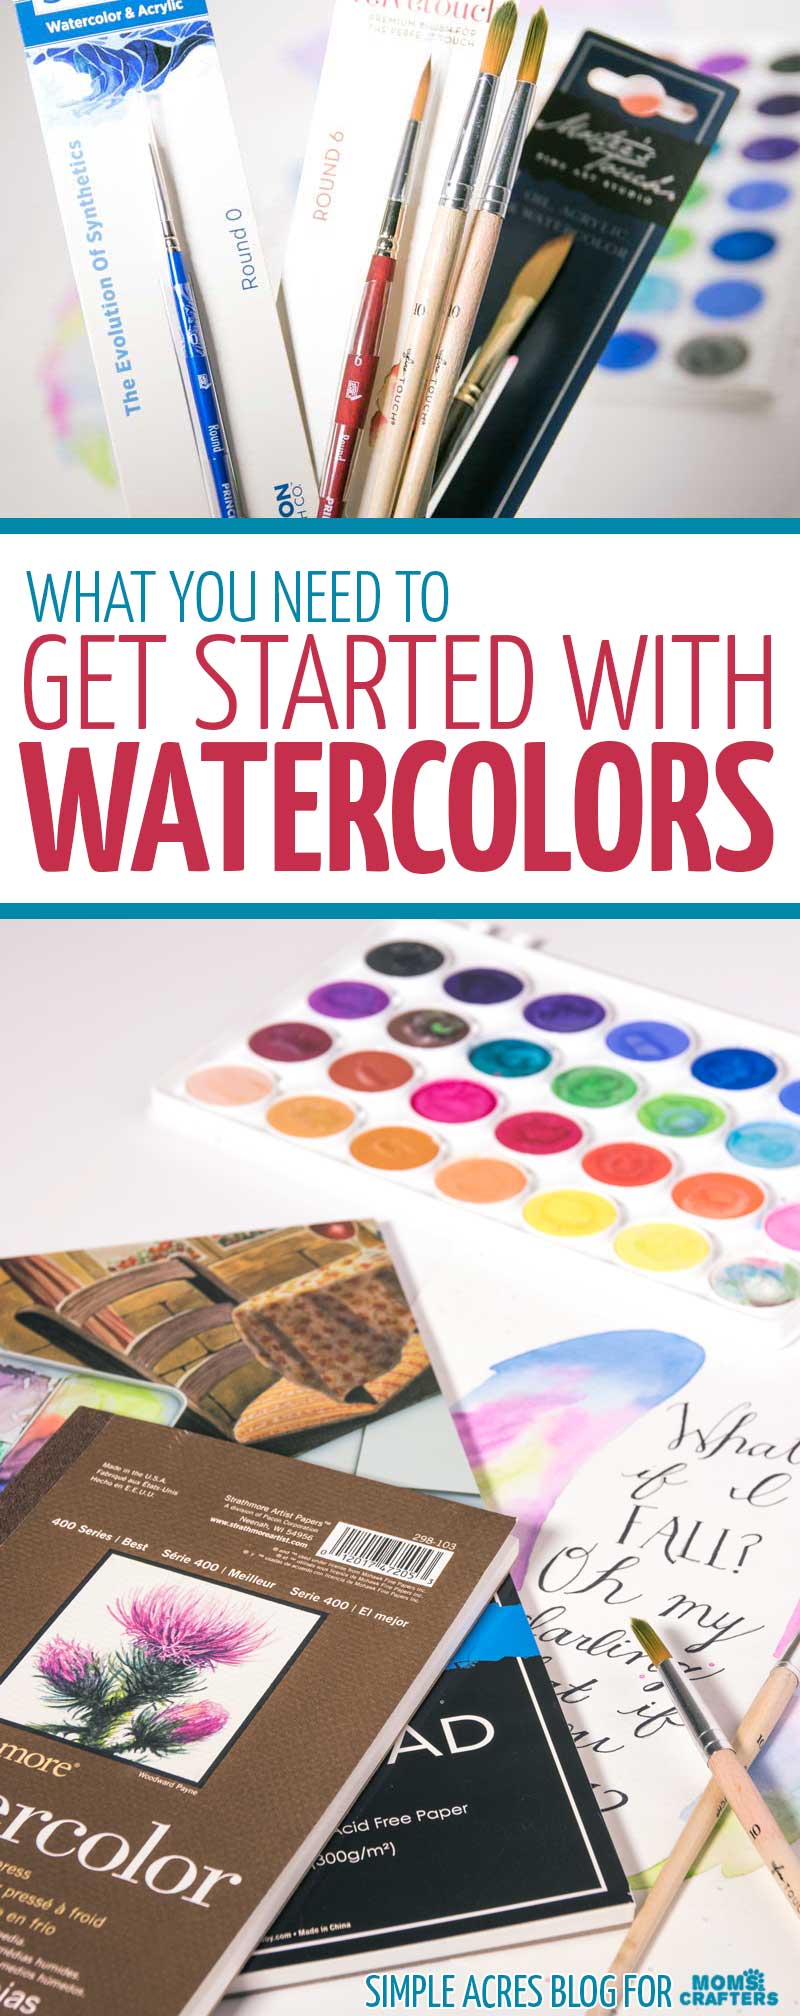 Get started watercolor painting with these best watercolor materials and watercolor painting supplies! If you're trying to learn how to paint with watercolour paints this is for you! #watercolor #brushlettering #momsandcrafters